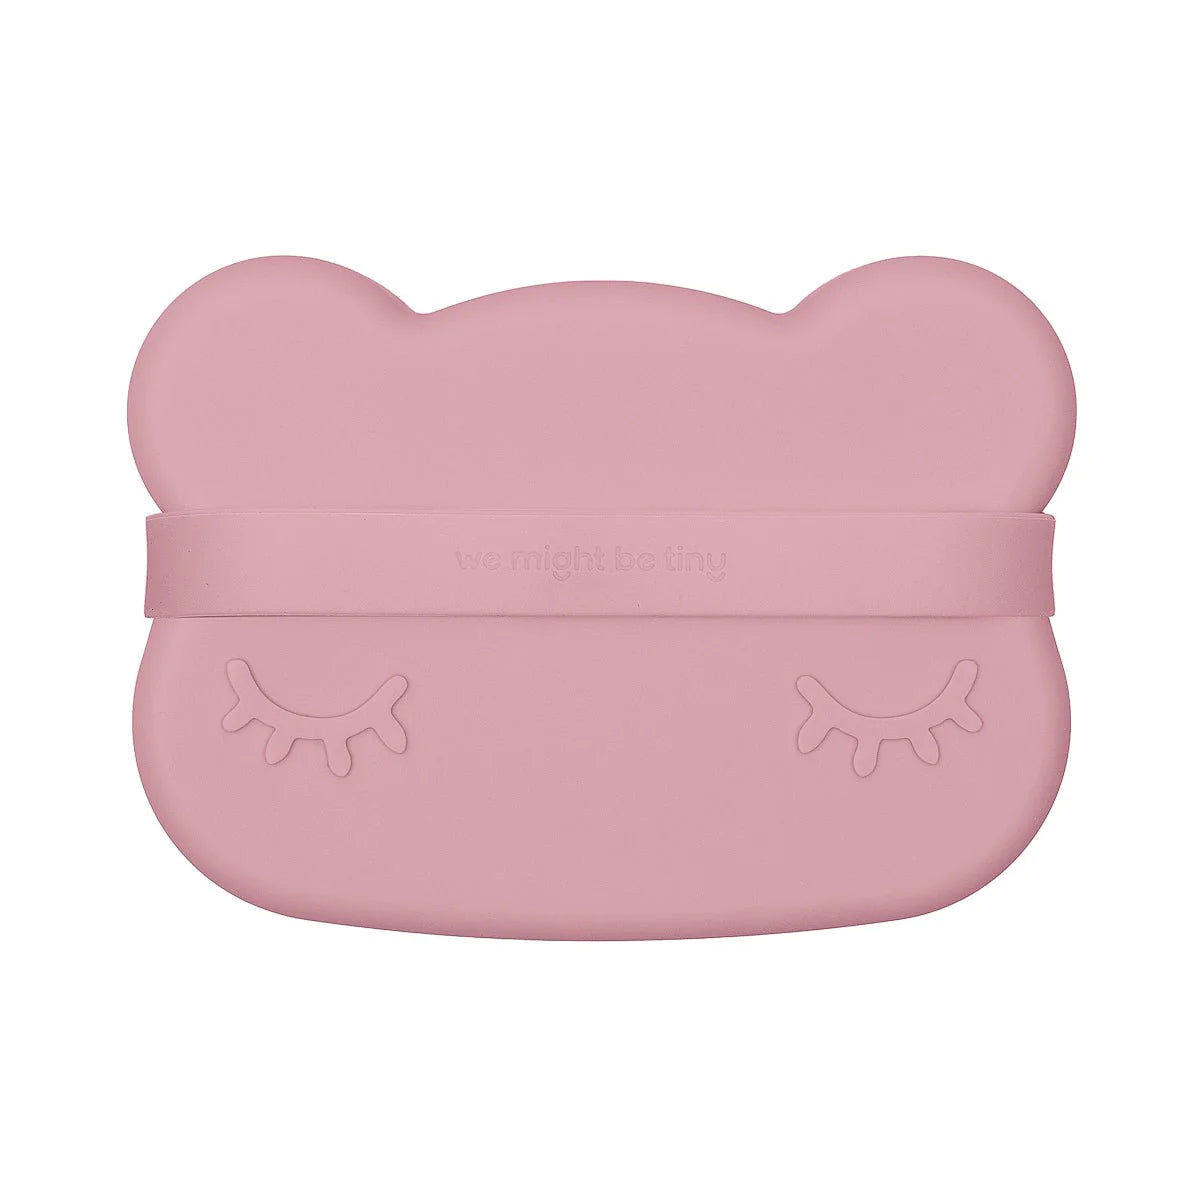 Bear snackie® - Silicone Snack - Bowl & Plate